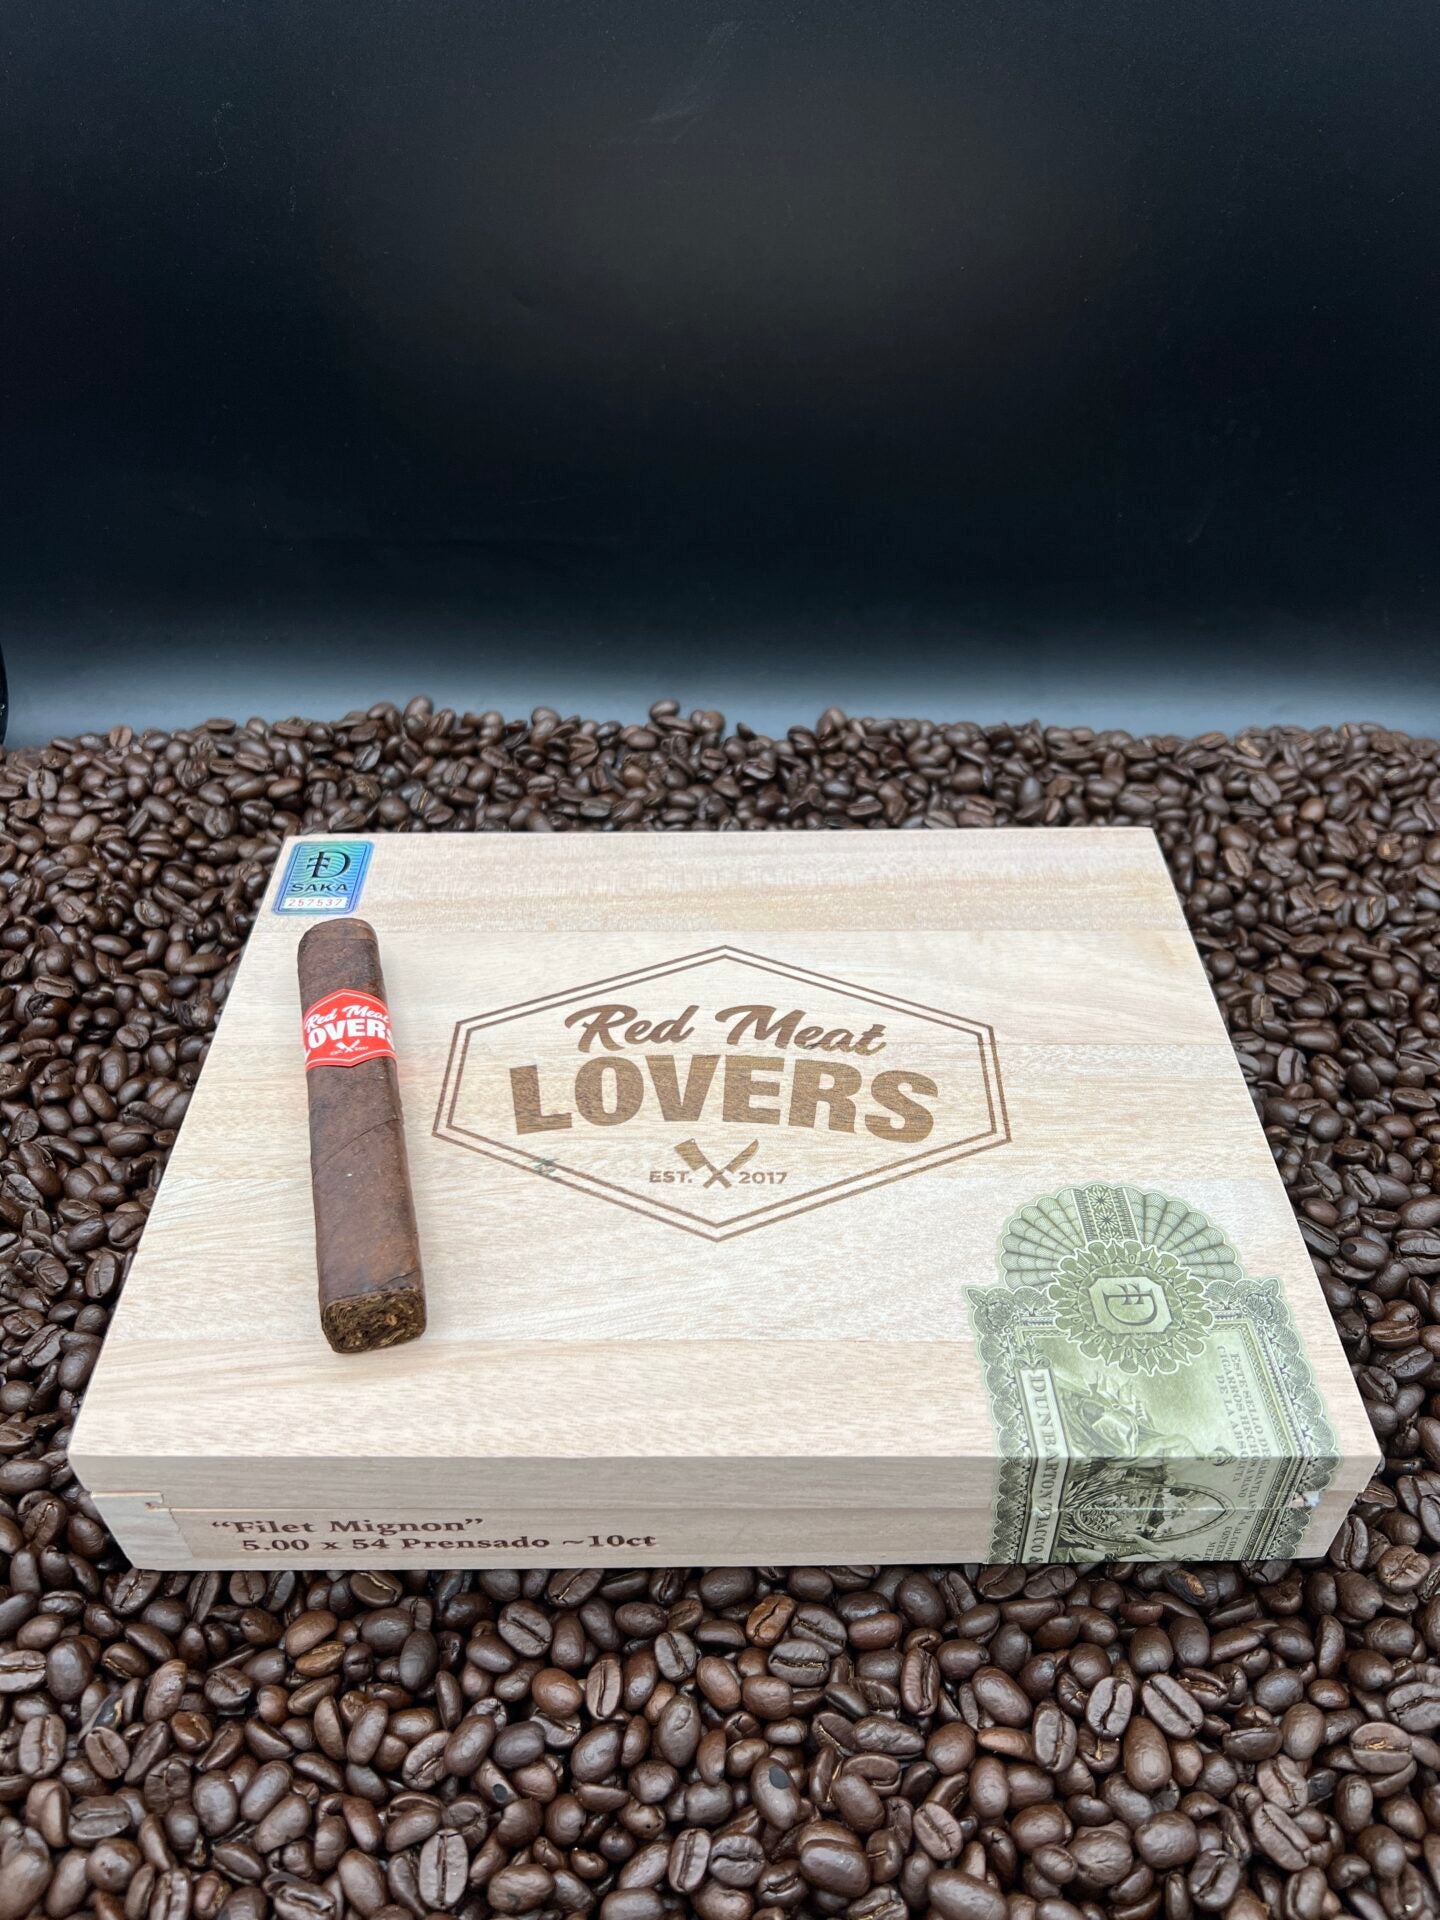 Dunbarton Tobacco & Trust - Red Meat Lovers "Filet Mignon" cigars supplied by Sir Louis Cigars